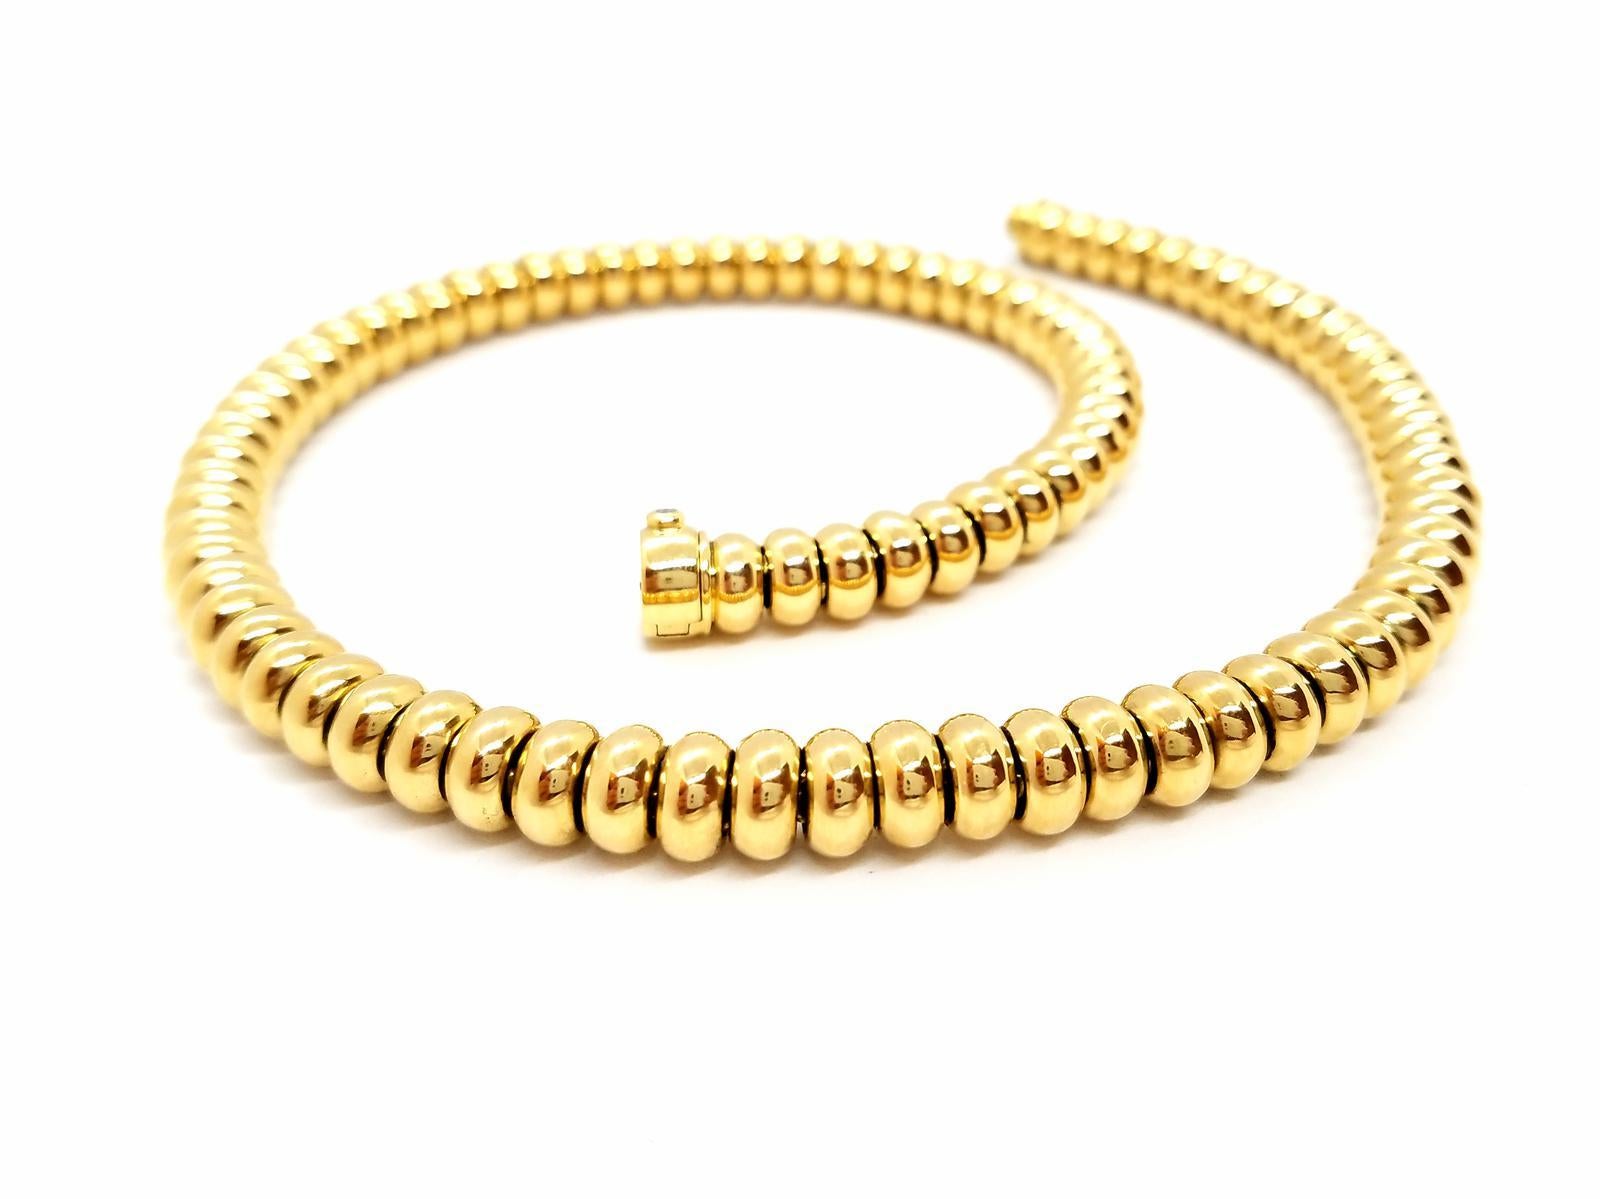 yellow gold necklace 750 mils (18 carats). crimped onto the clasp of a brilliant cut diamond of about 0.01 ct. length: 43 cm. width: 0.82 cm. total weight: 118.43 g. punched . excellent condition
